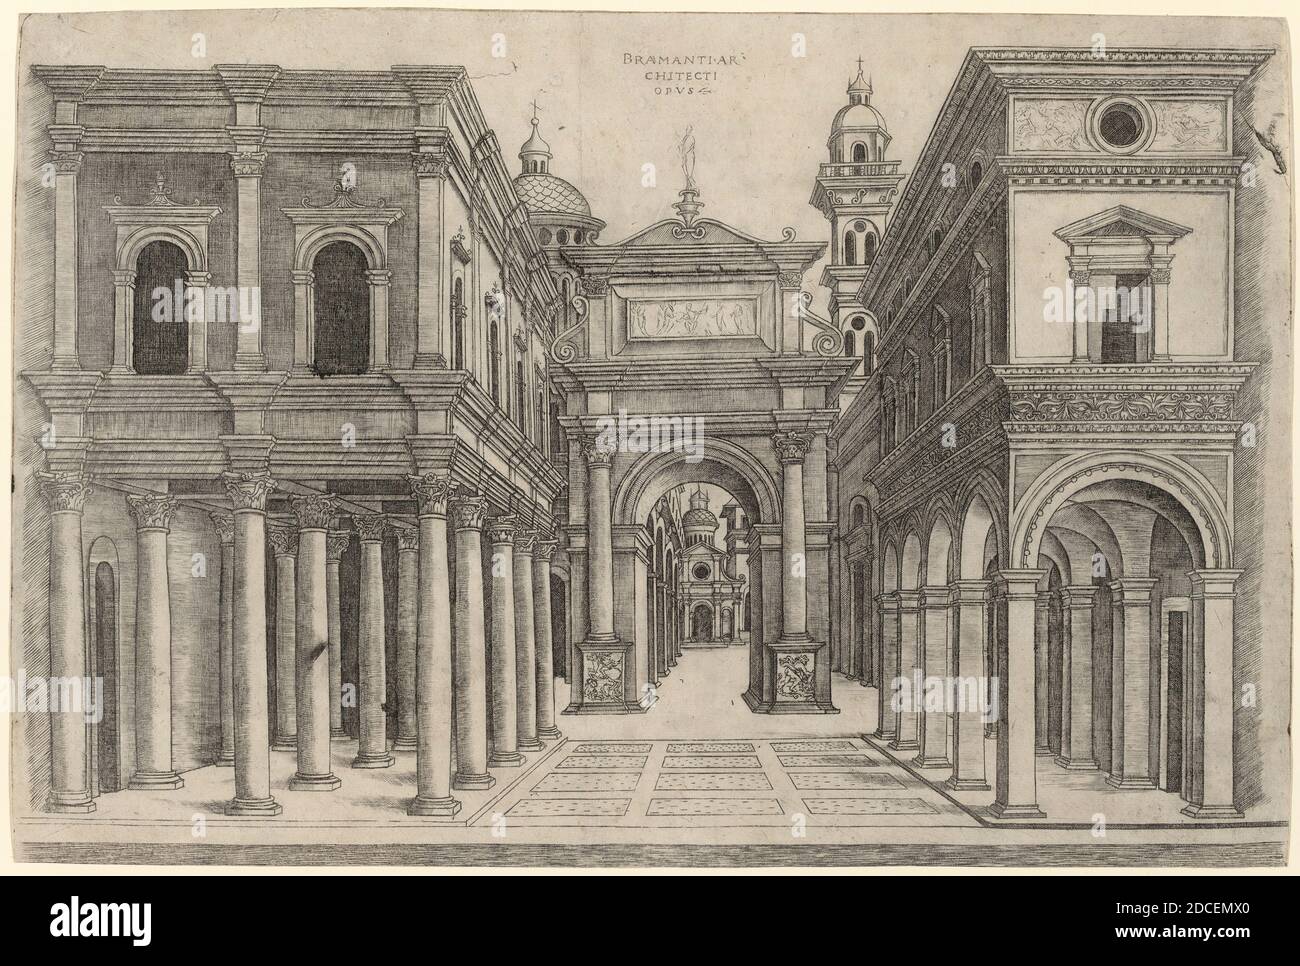 Andrea Zoan, (artist), Italian, active c.1475/1519, Donato Bramante, (artist after), Italian, probably 1444 - 1514, A Street with Various Buildings, Colonnades and an Arch, c. 1500/1510, engraving Stock Photo